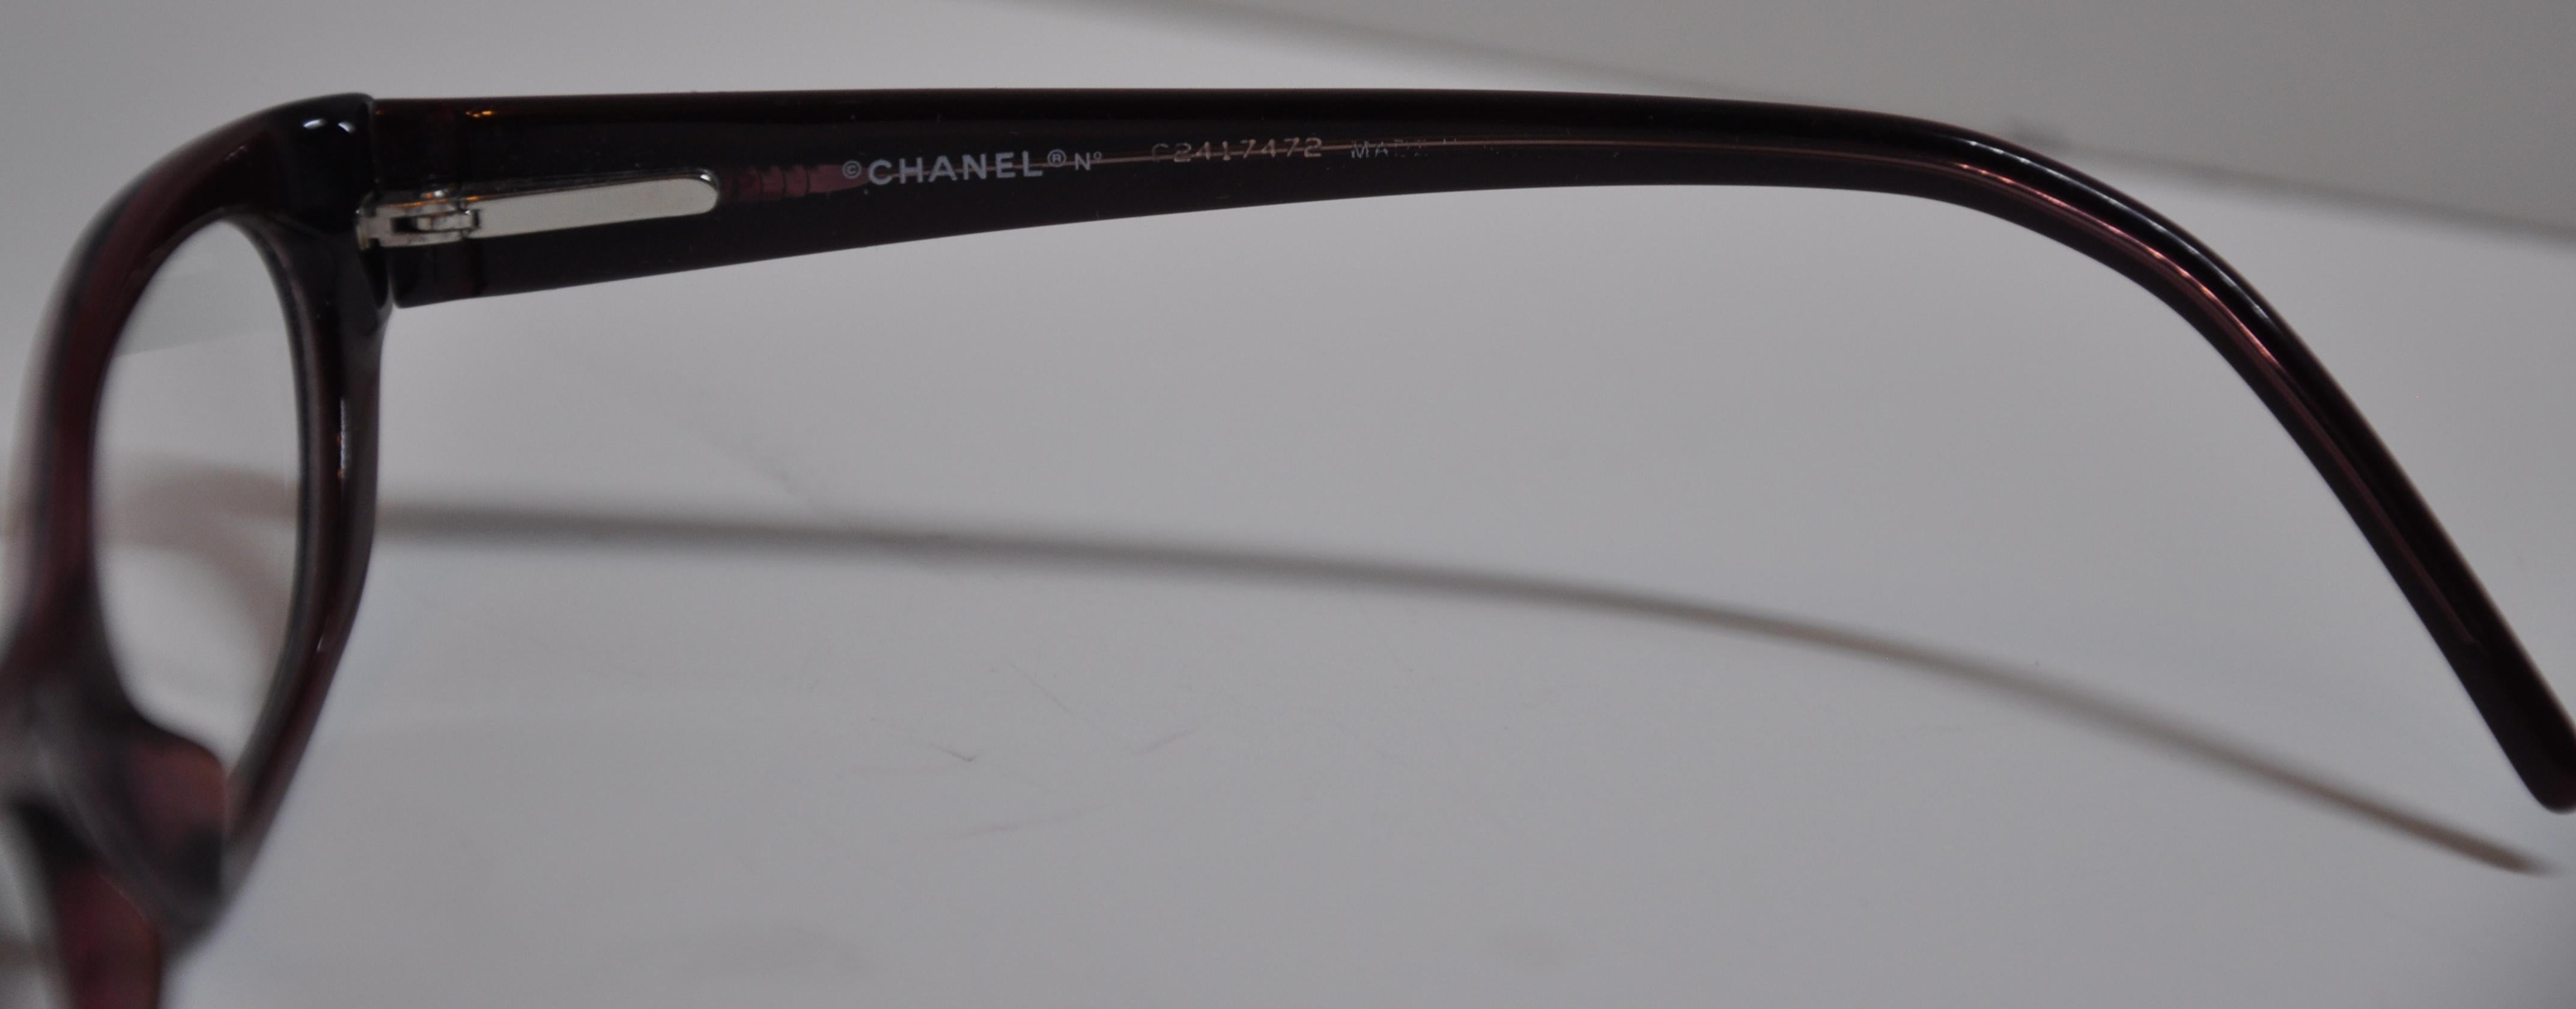 chanel reading glasses with pearls